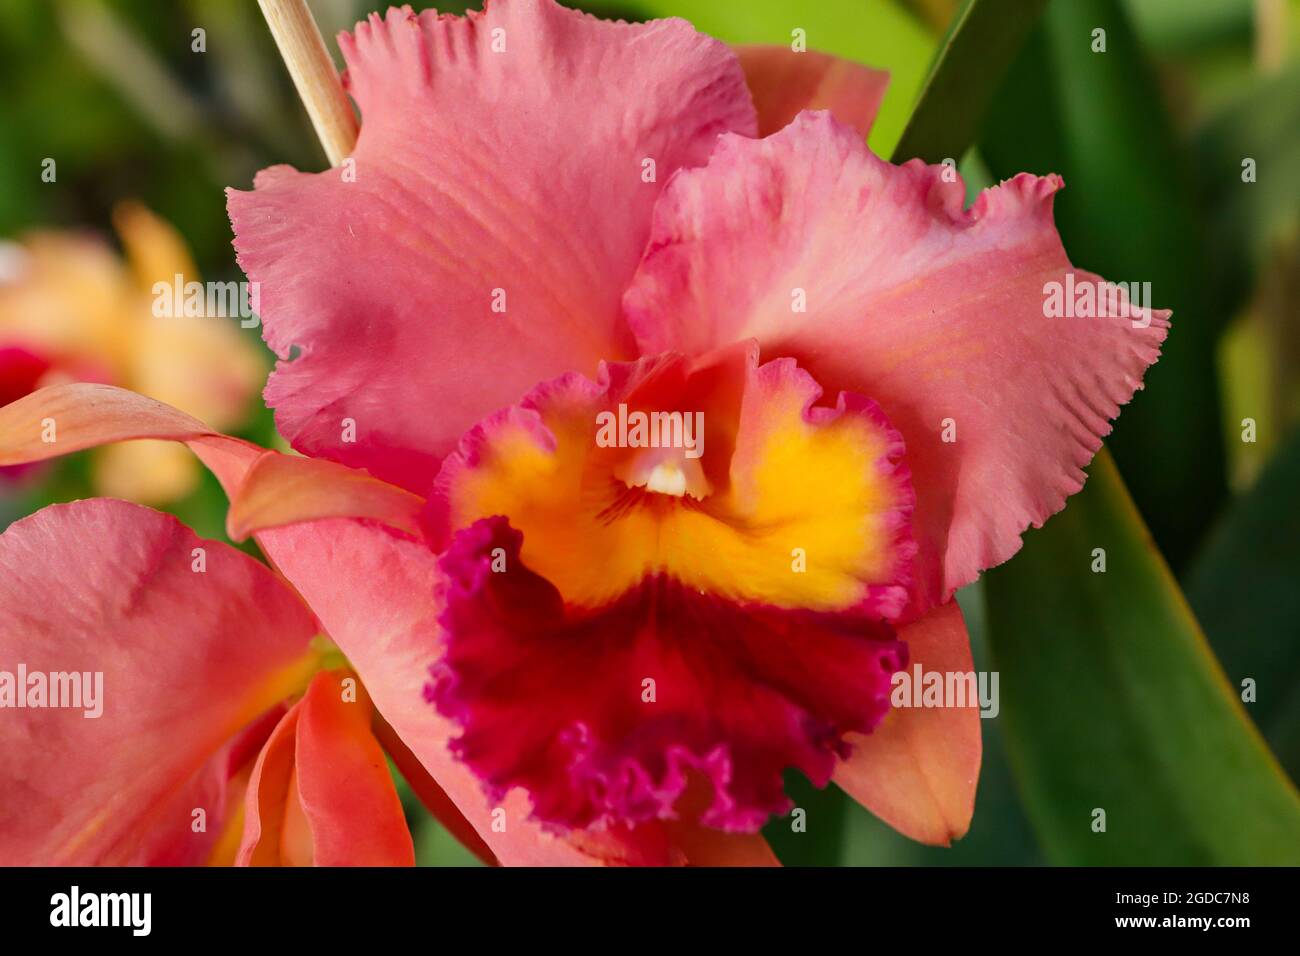 Blc George King orchid flower with center focus and rest of image blurred Stock Photo